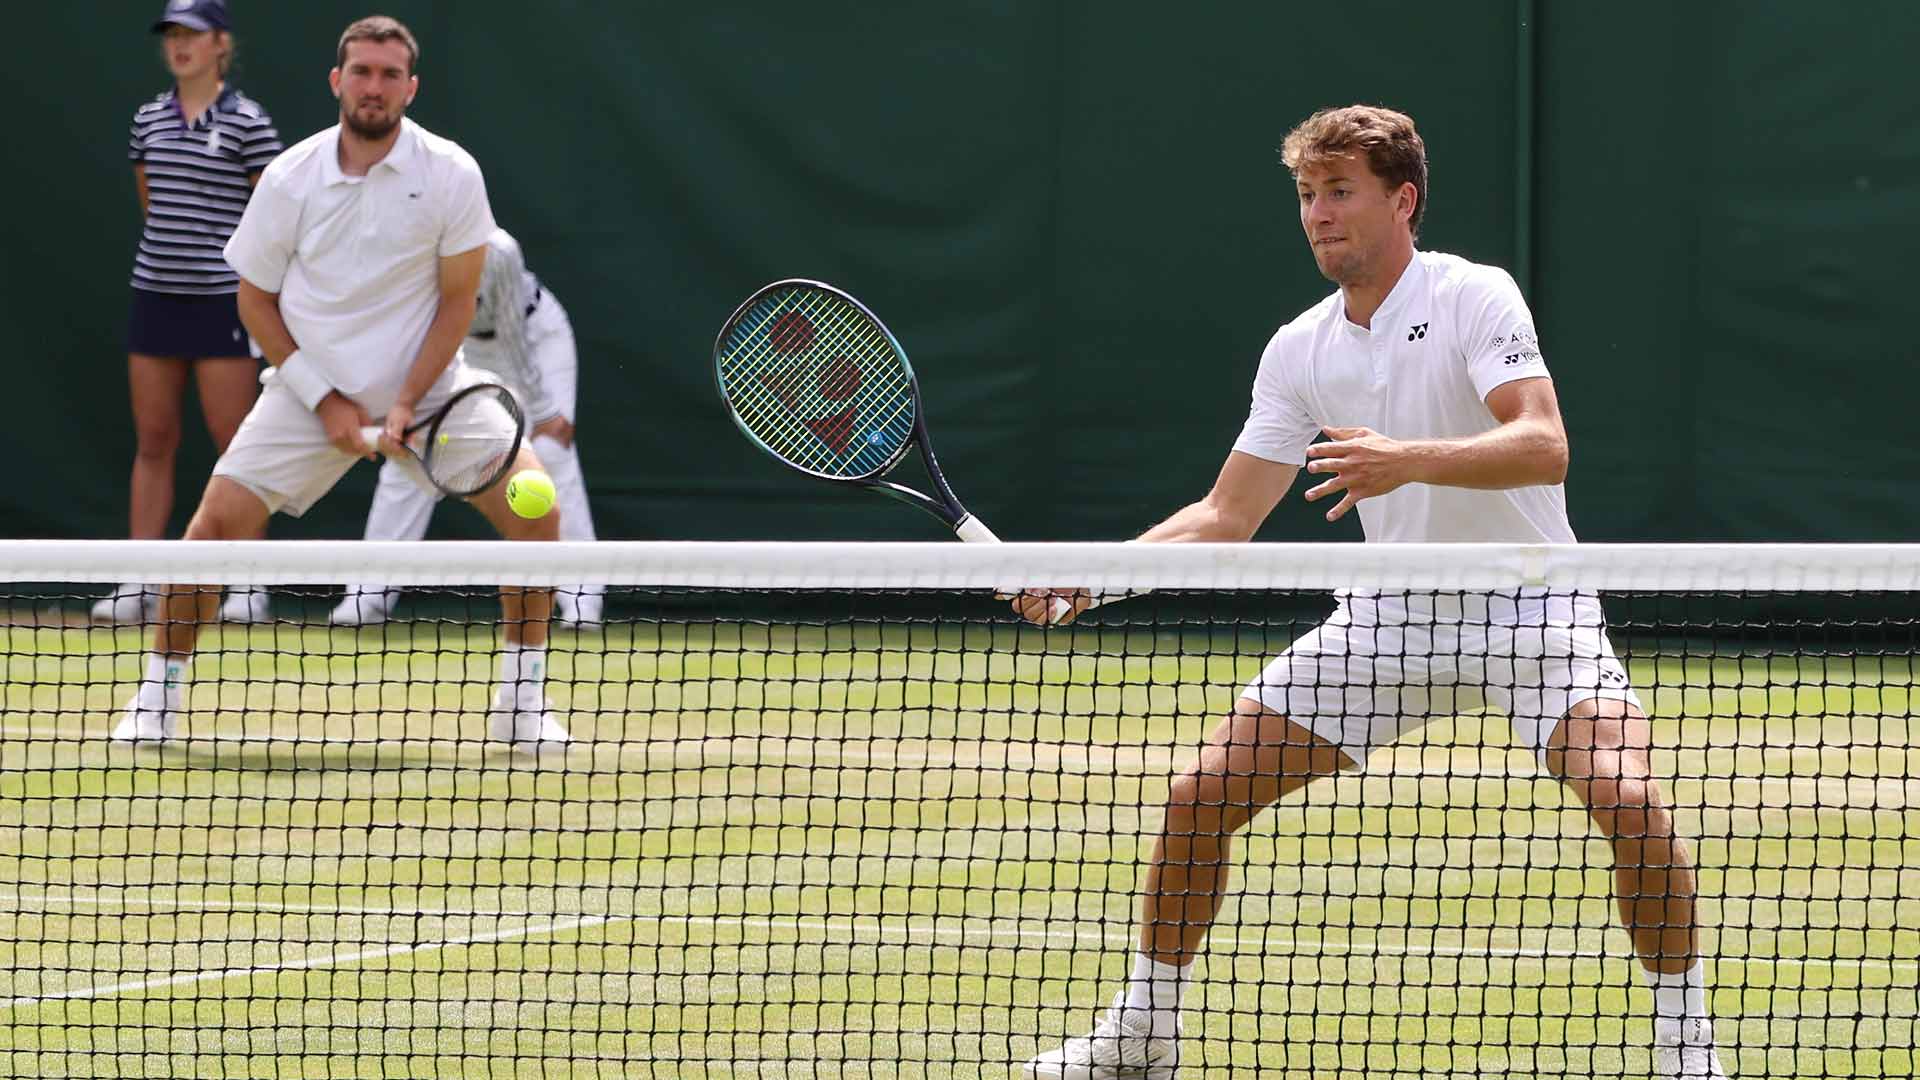 William Blumberg and Casper Ruud will compete together at Wimbledon for the third consecutive edition.